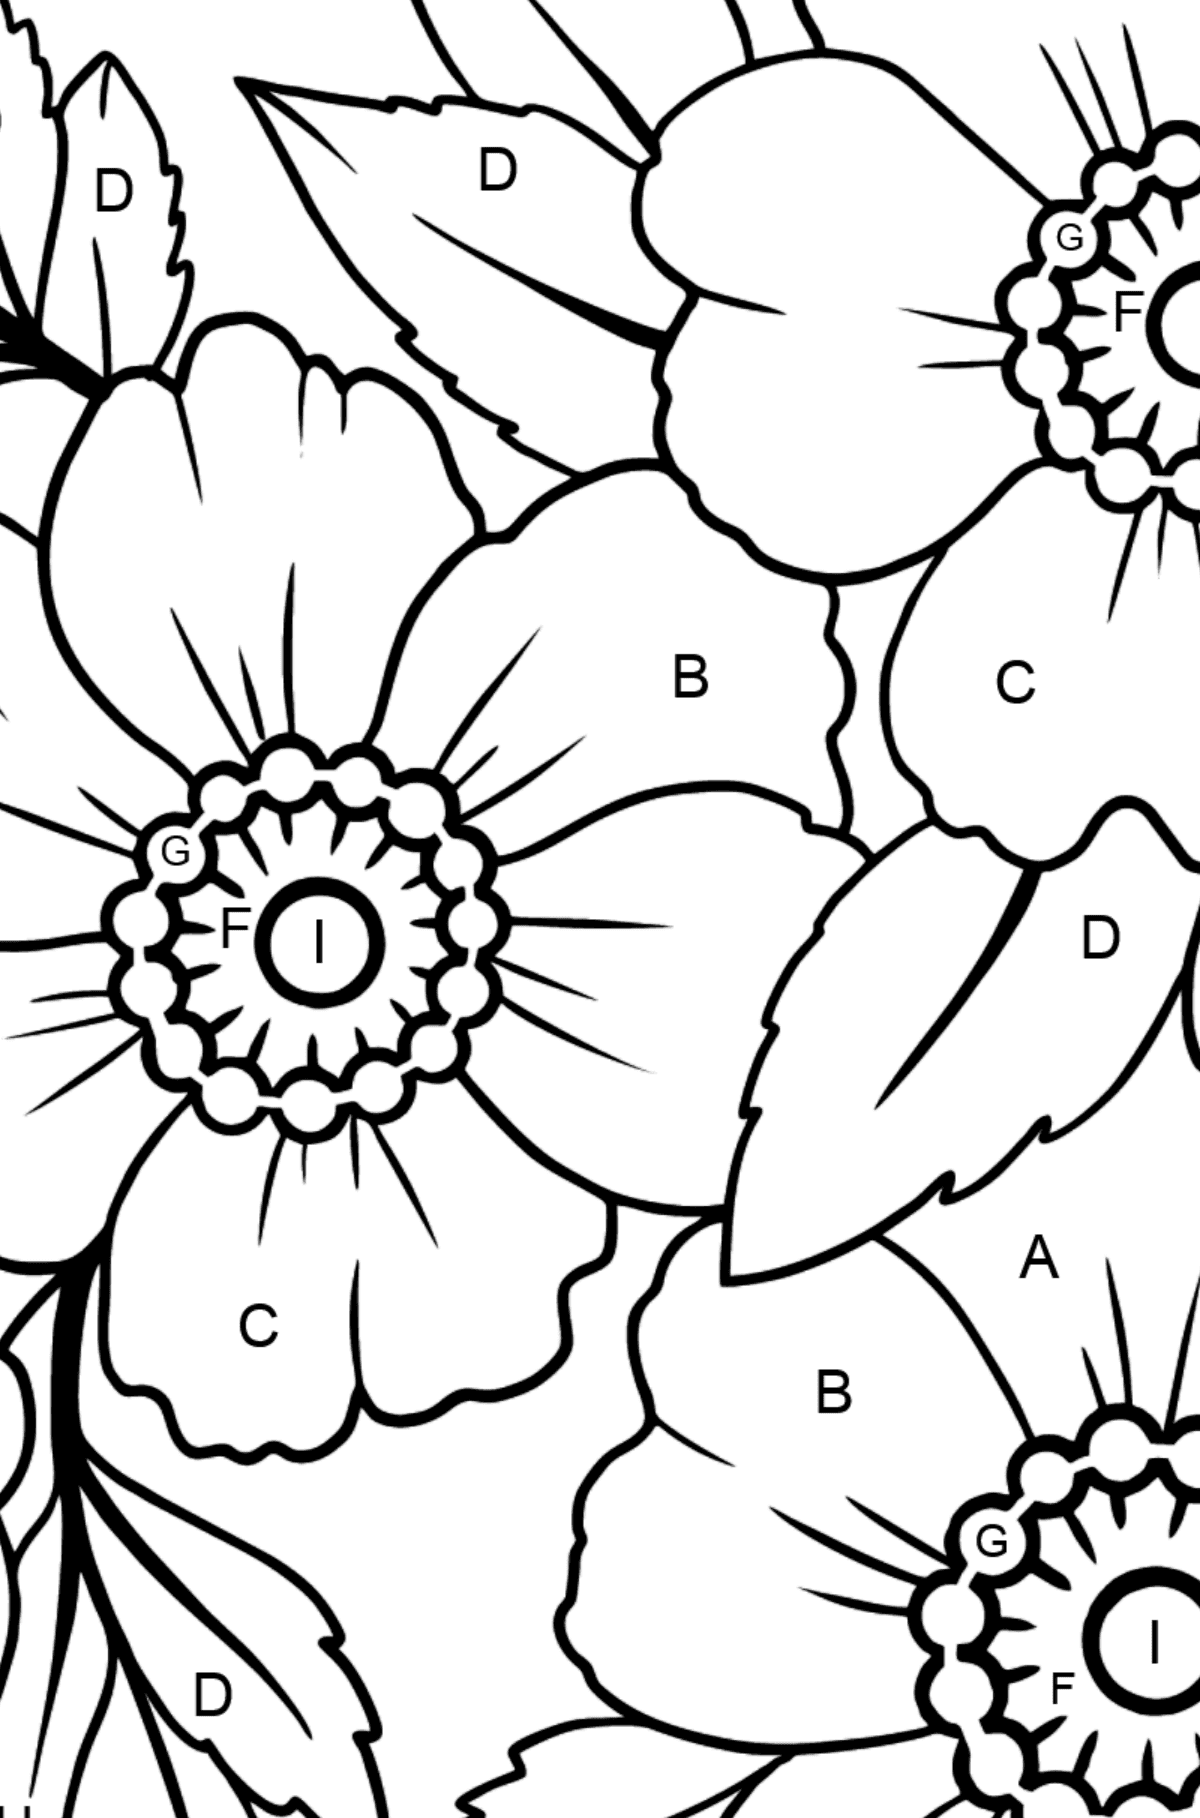 Flower Coloring Page - Japanese Anemone - Coloring by Letters for Kids